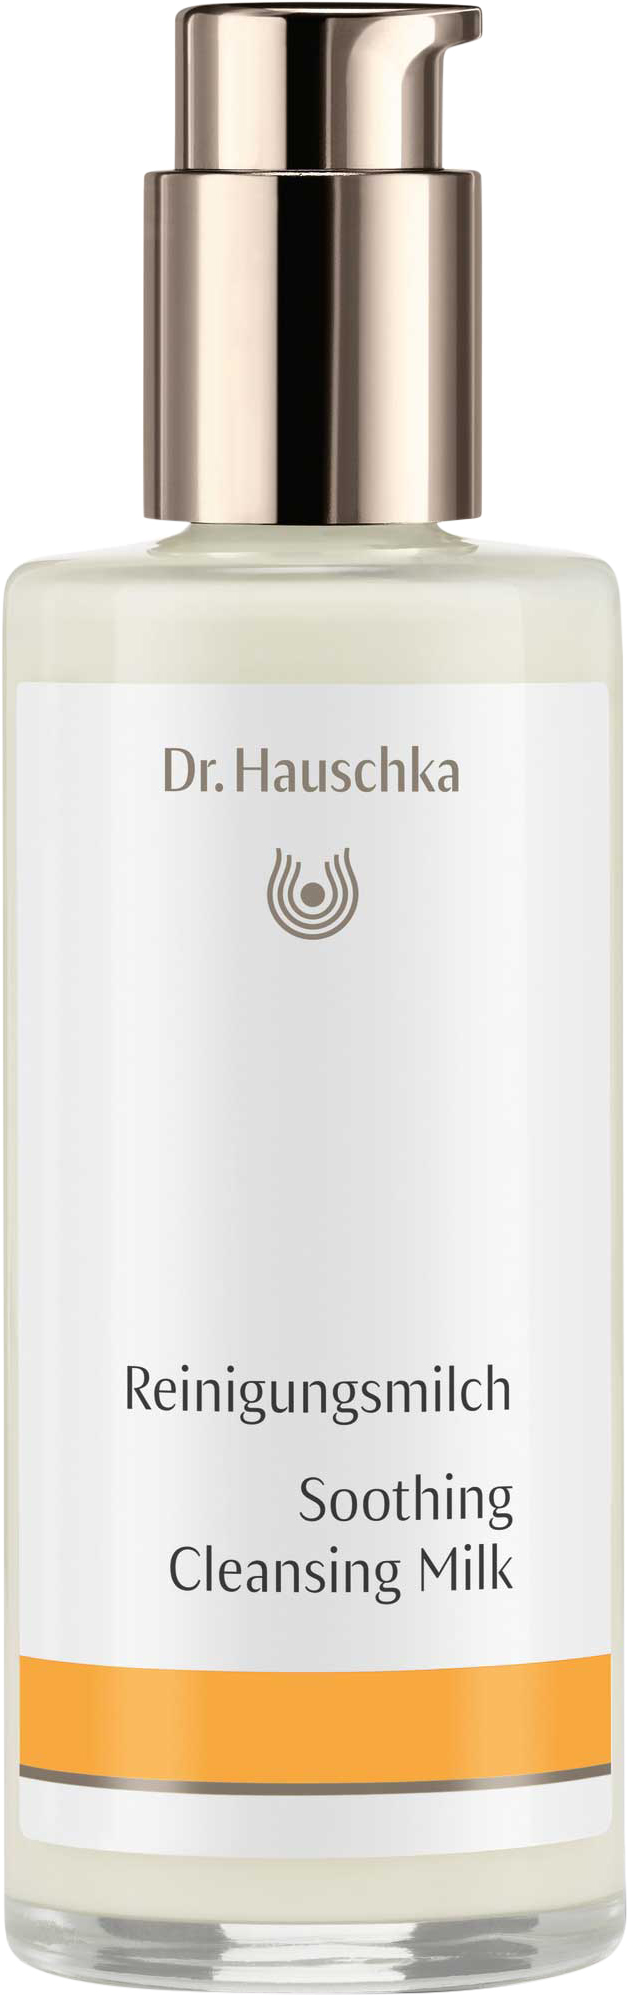 Dr. Hauschka - Soothing Cleansing Milk 145 ml